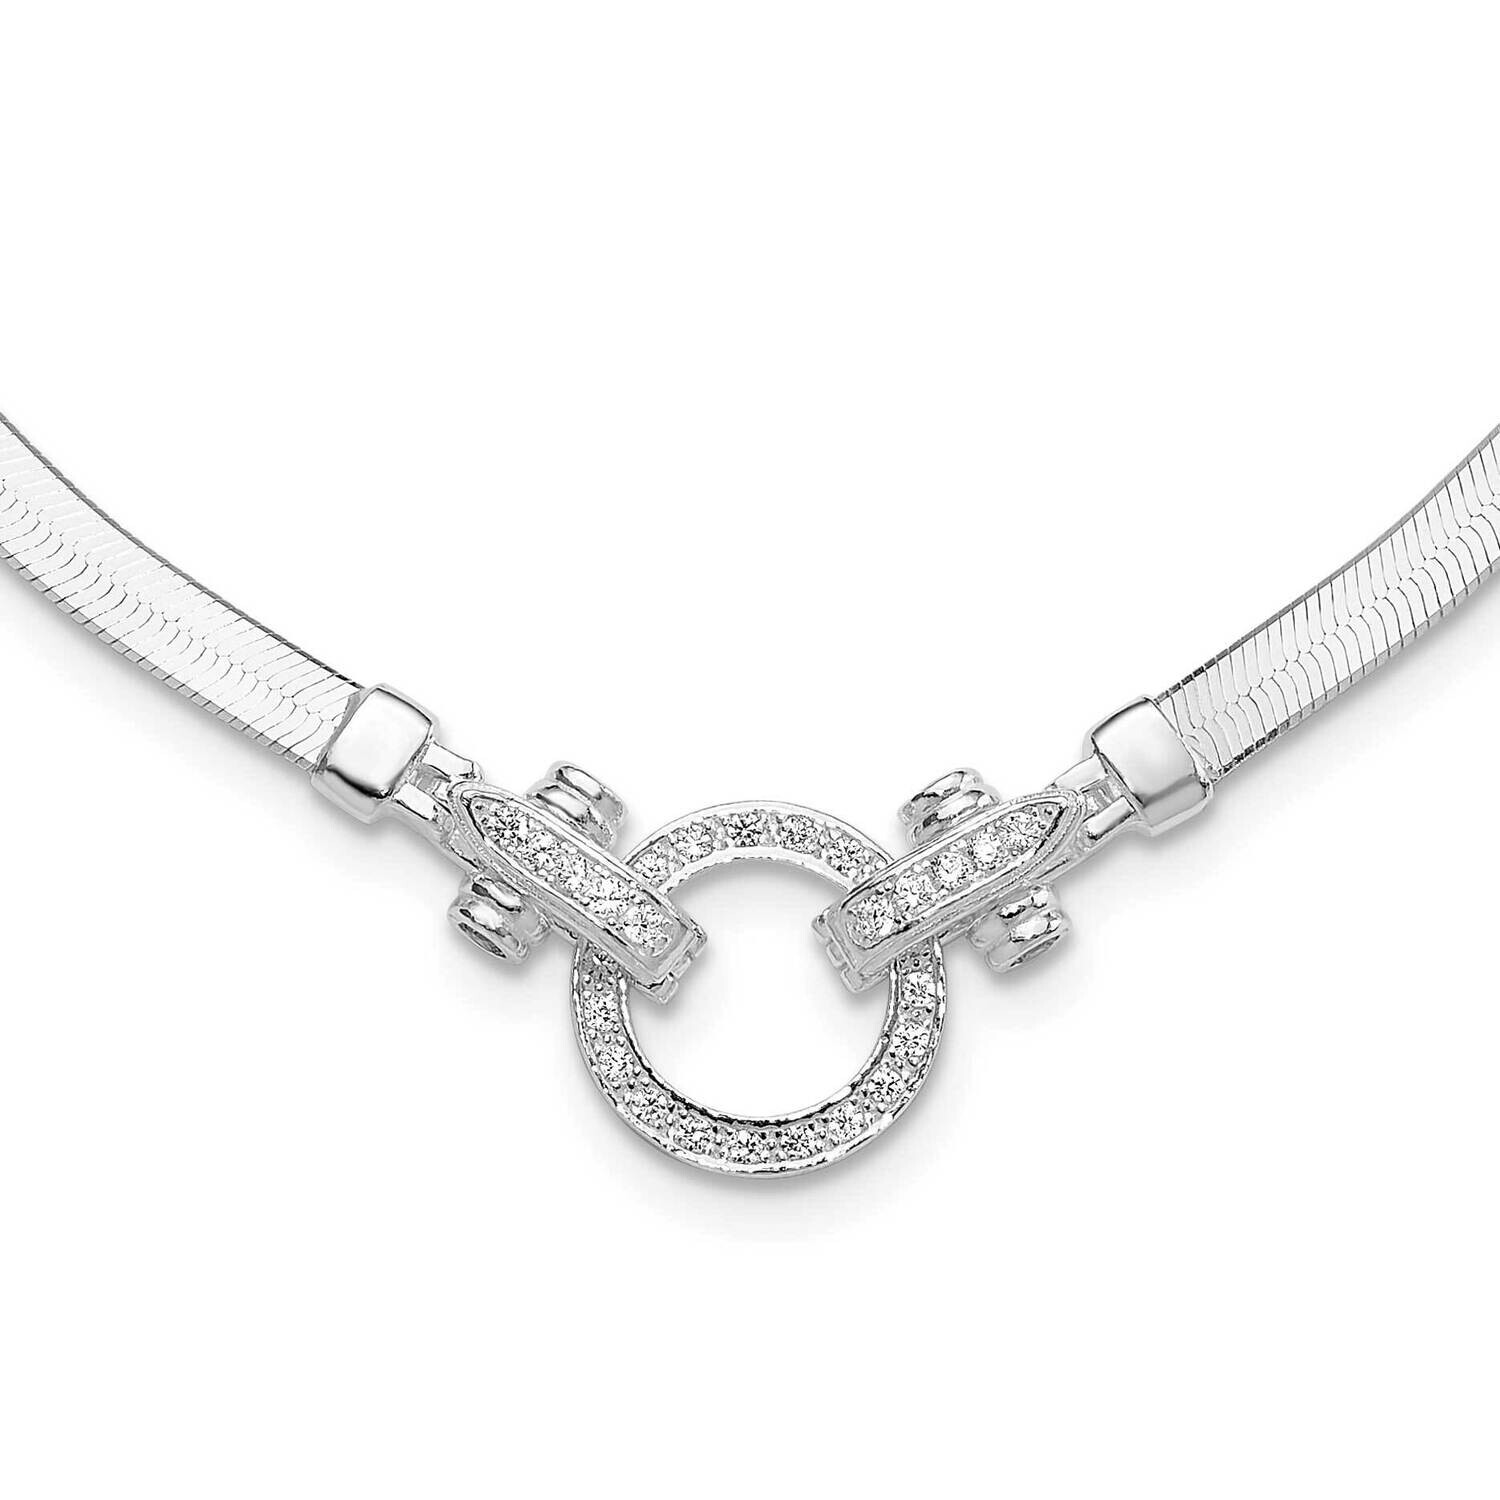 CZ Herringbone 16 Inch 2 Inch Extender Necklace Sterling Silver Rhodium-Plated QG6521-16